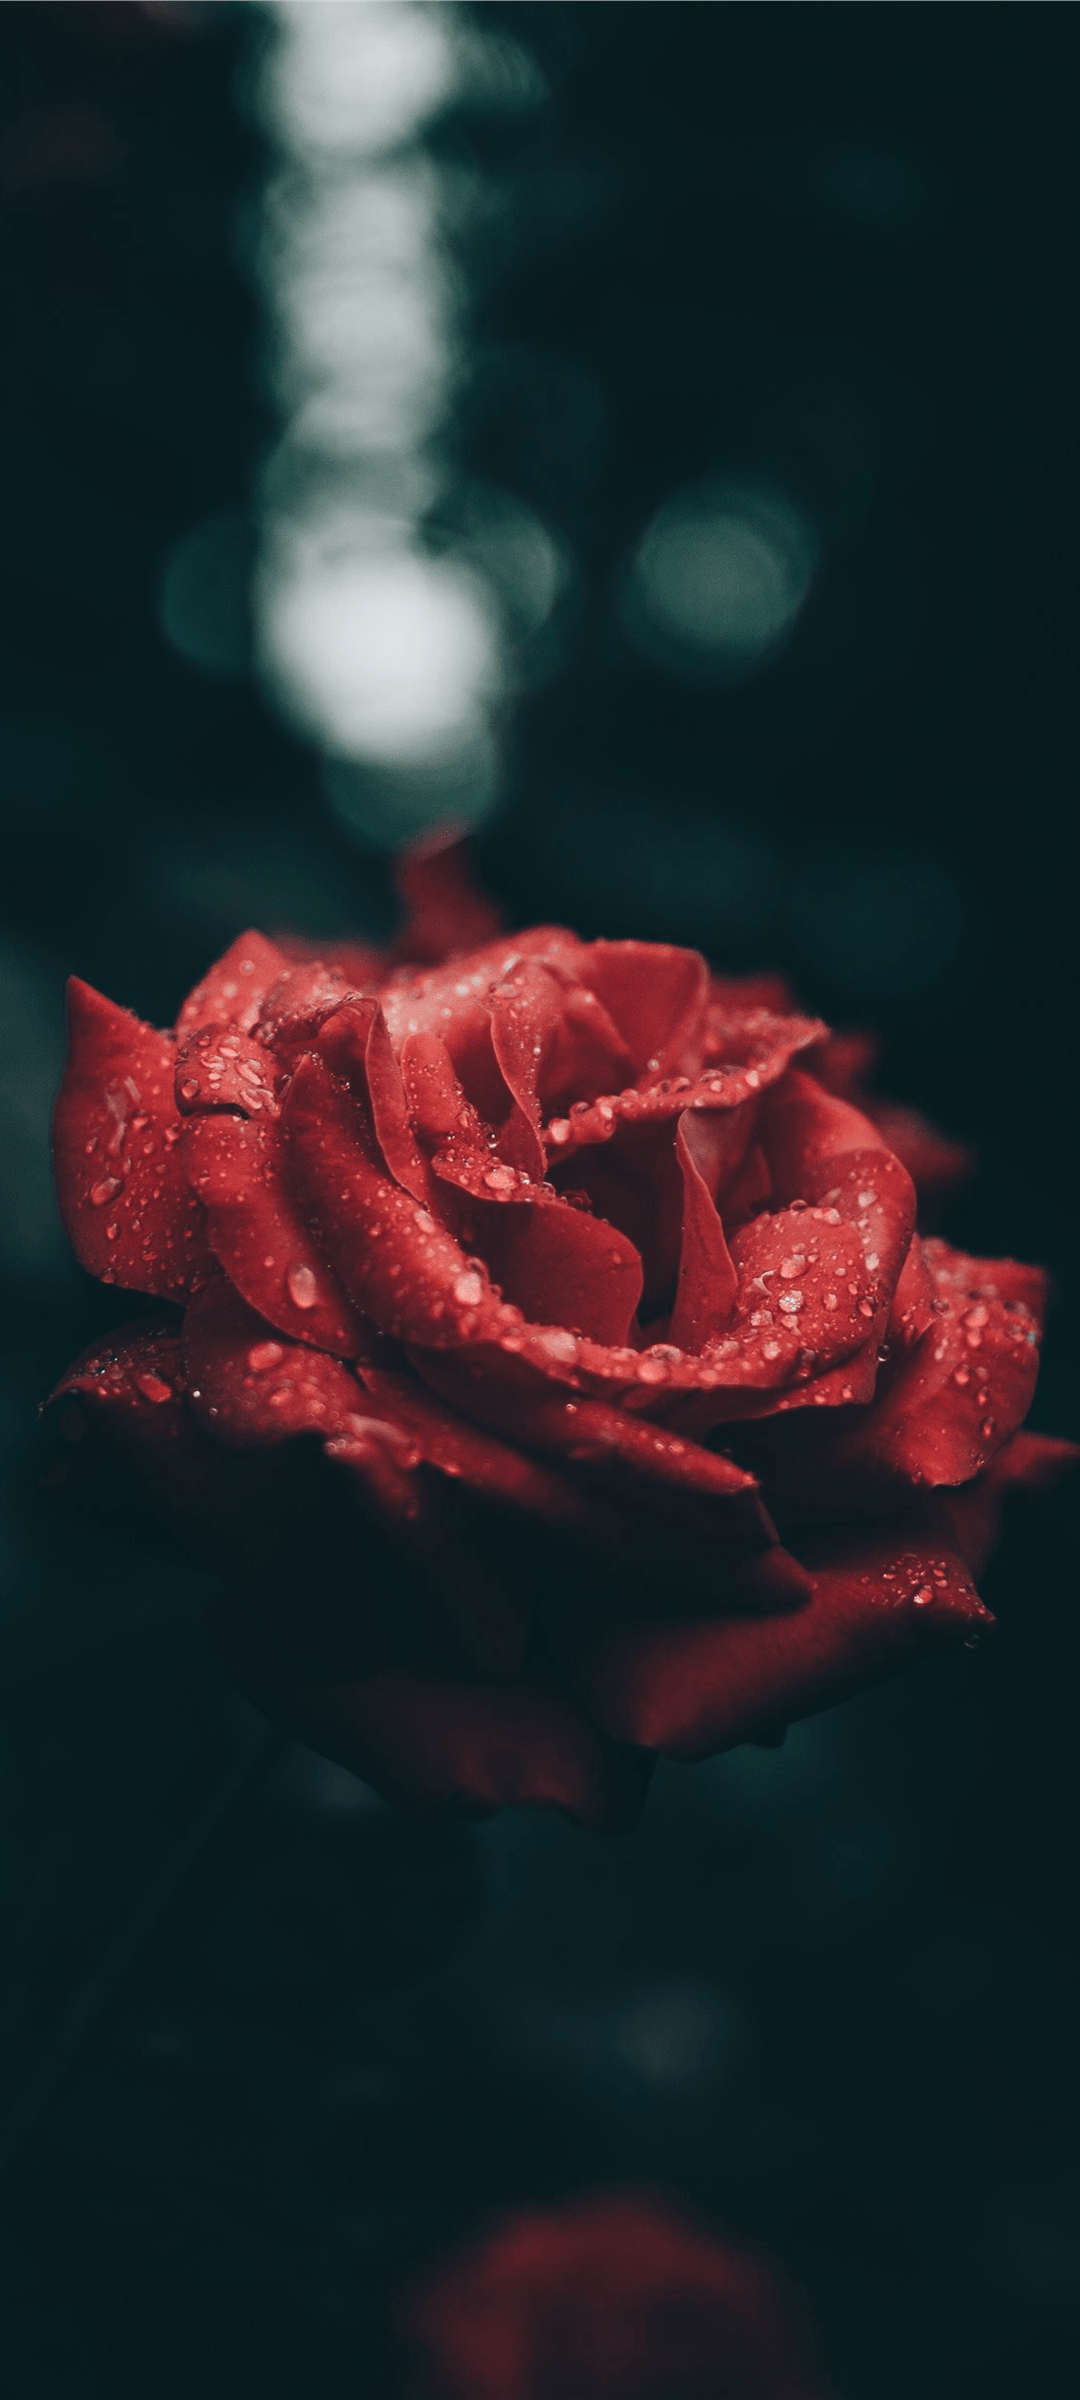 A close up of a red rose with water droplets on it - 1080x2400